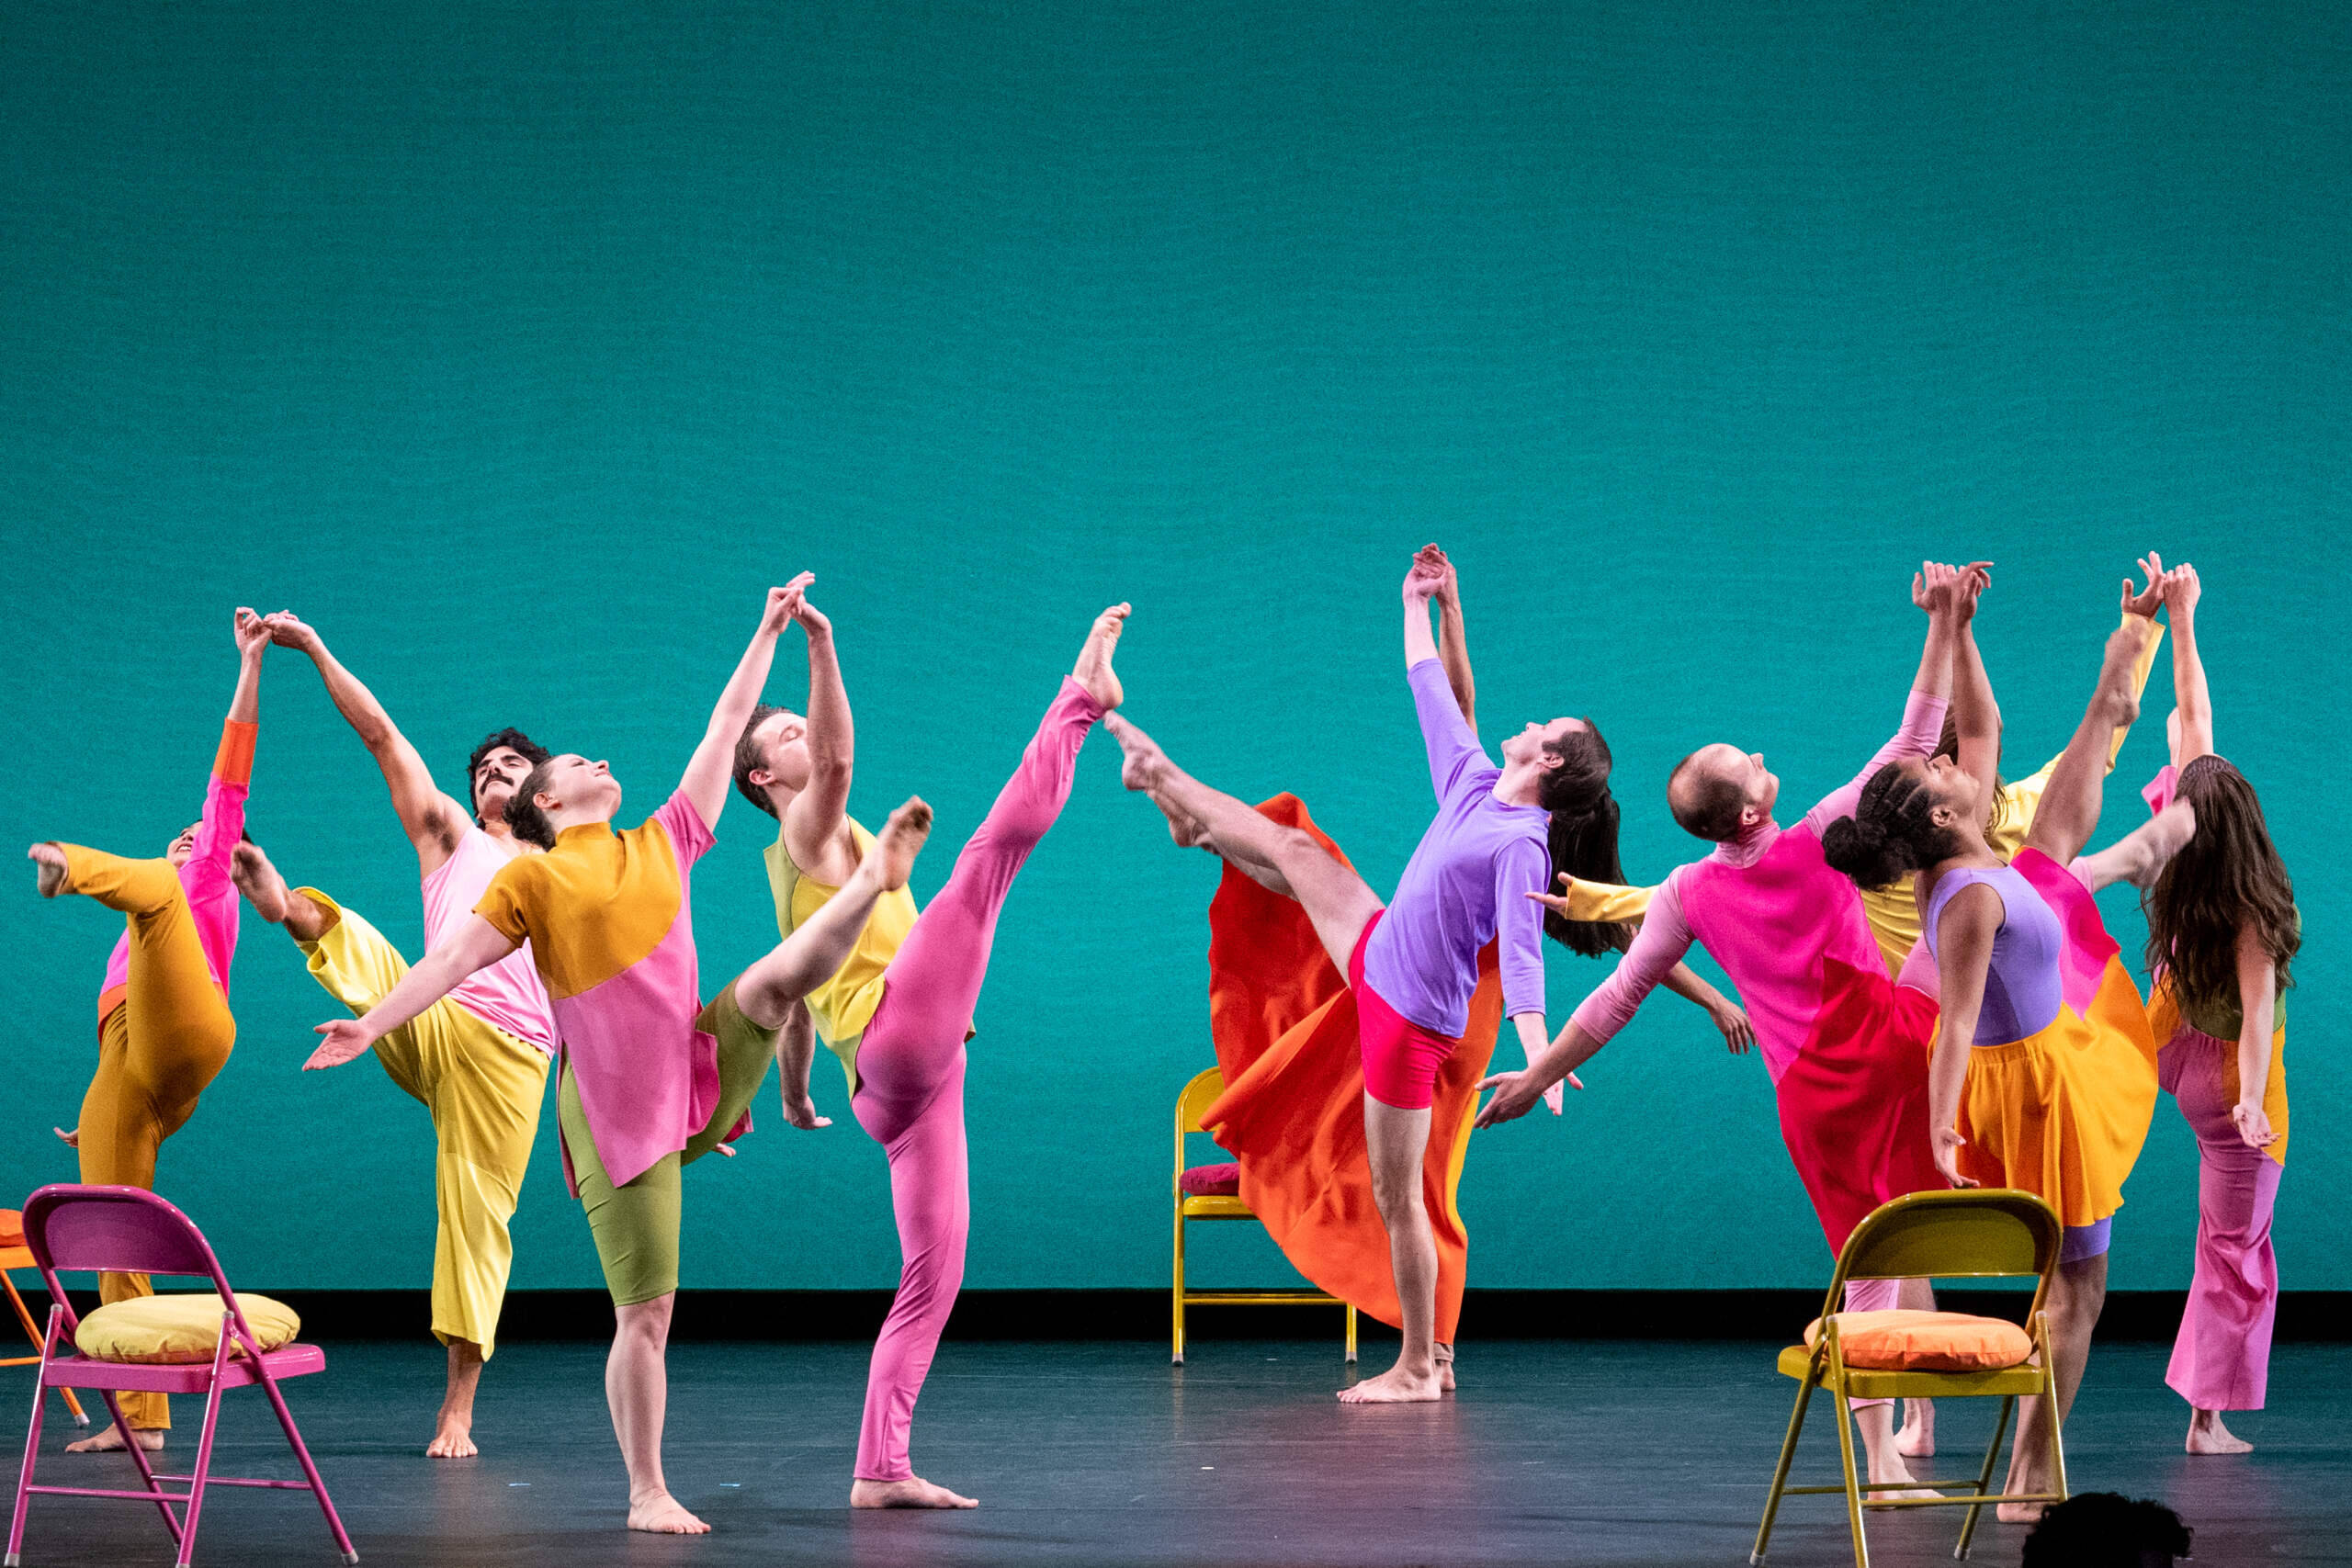 Mark Morris Dance Group will perform 'The Look of Love' at Jacob's Pillow Dance Festival 2023. (Courtesy Molly Bartels/Jacob's Pillow)